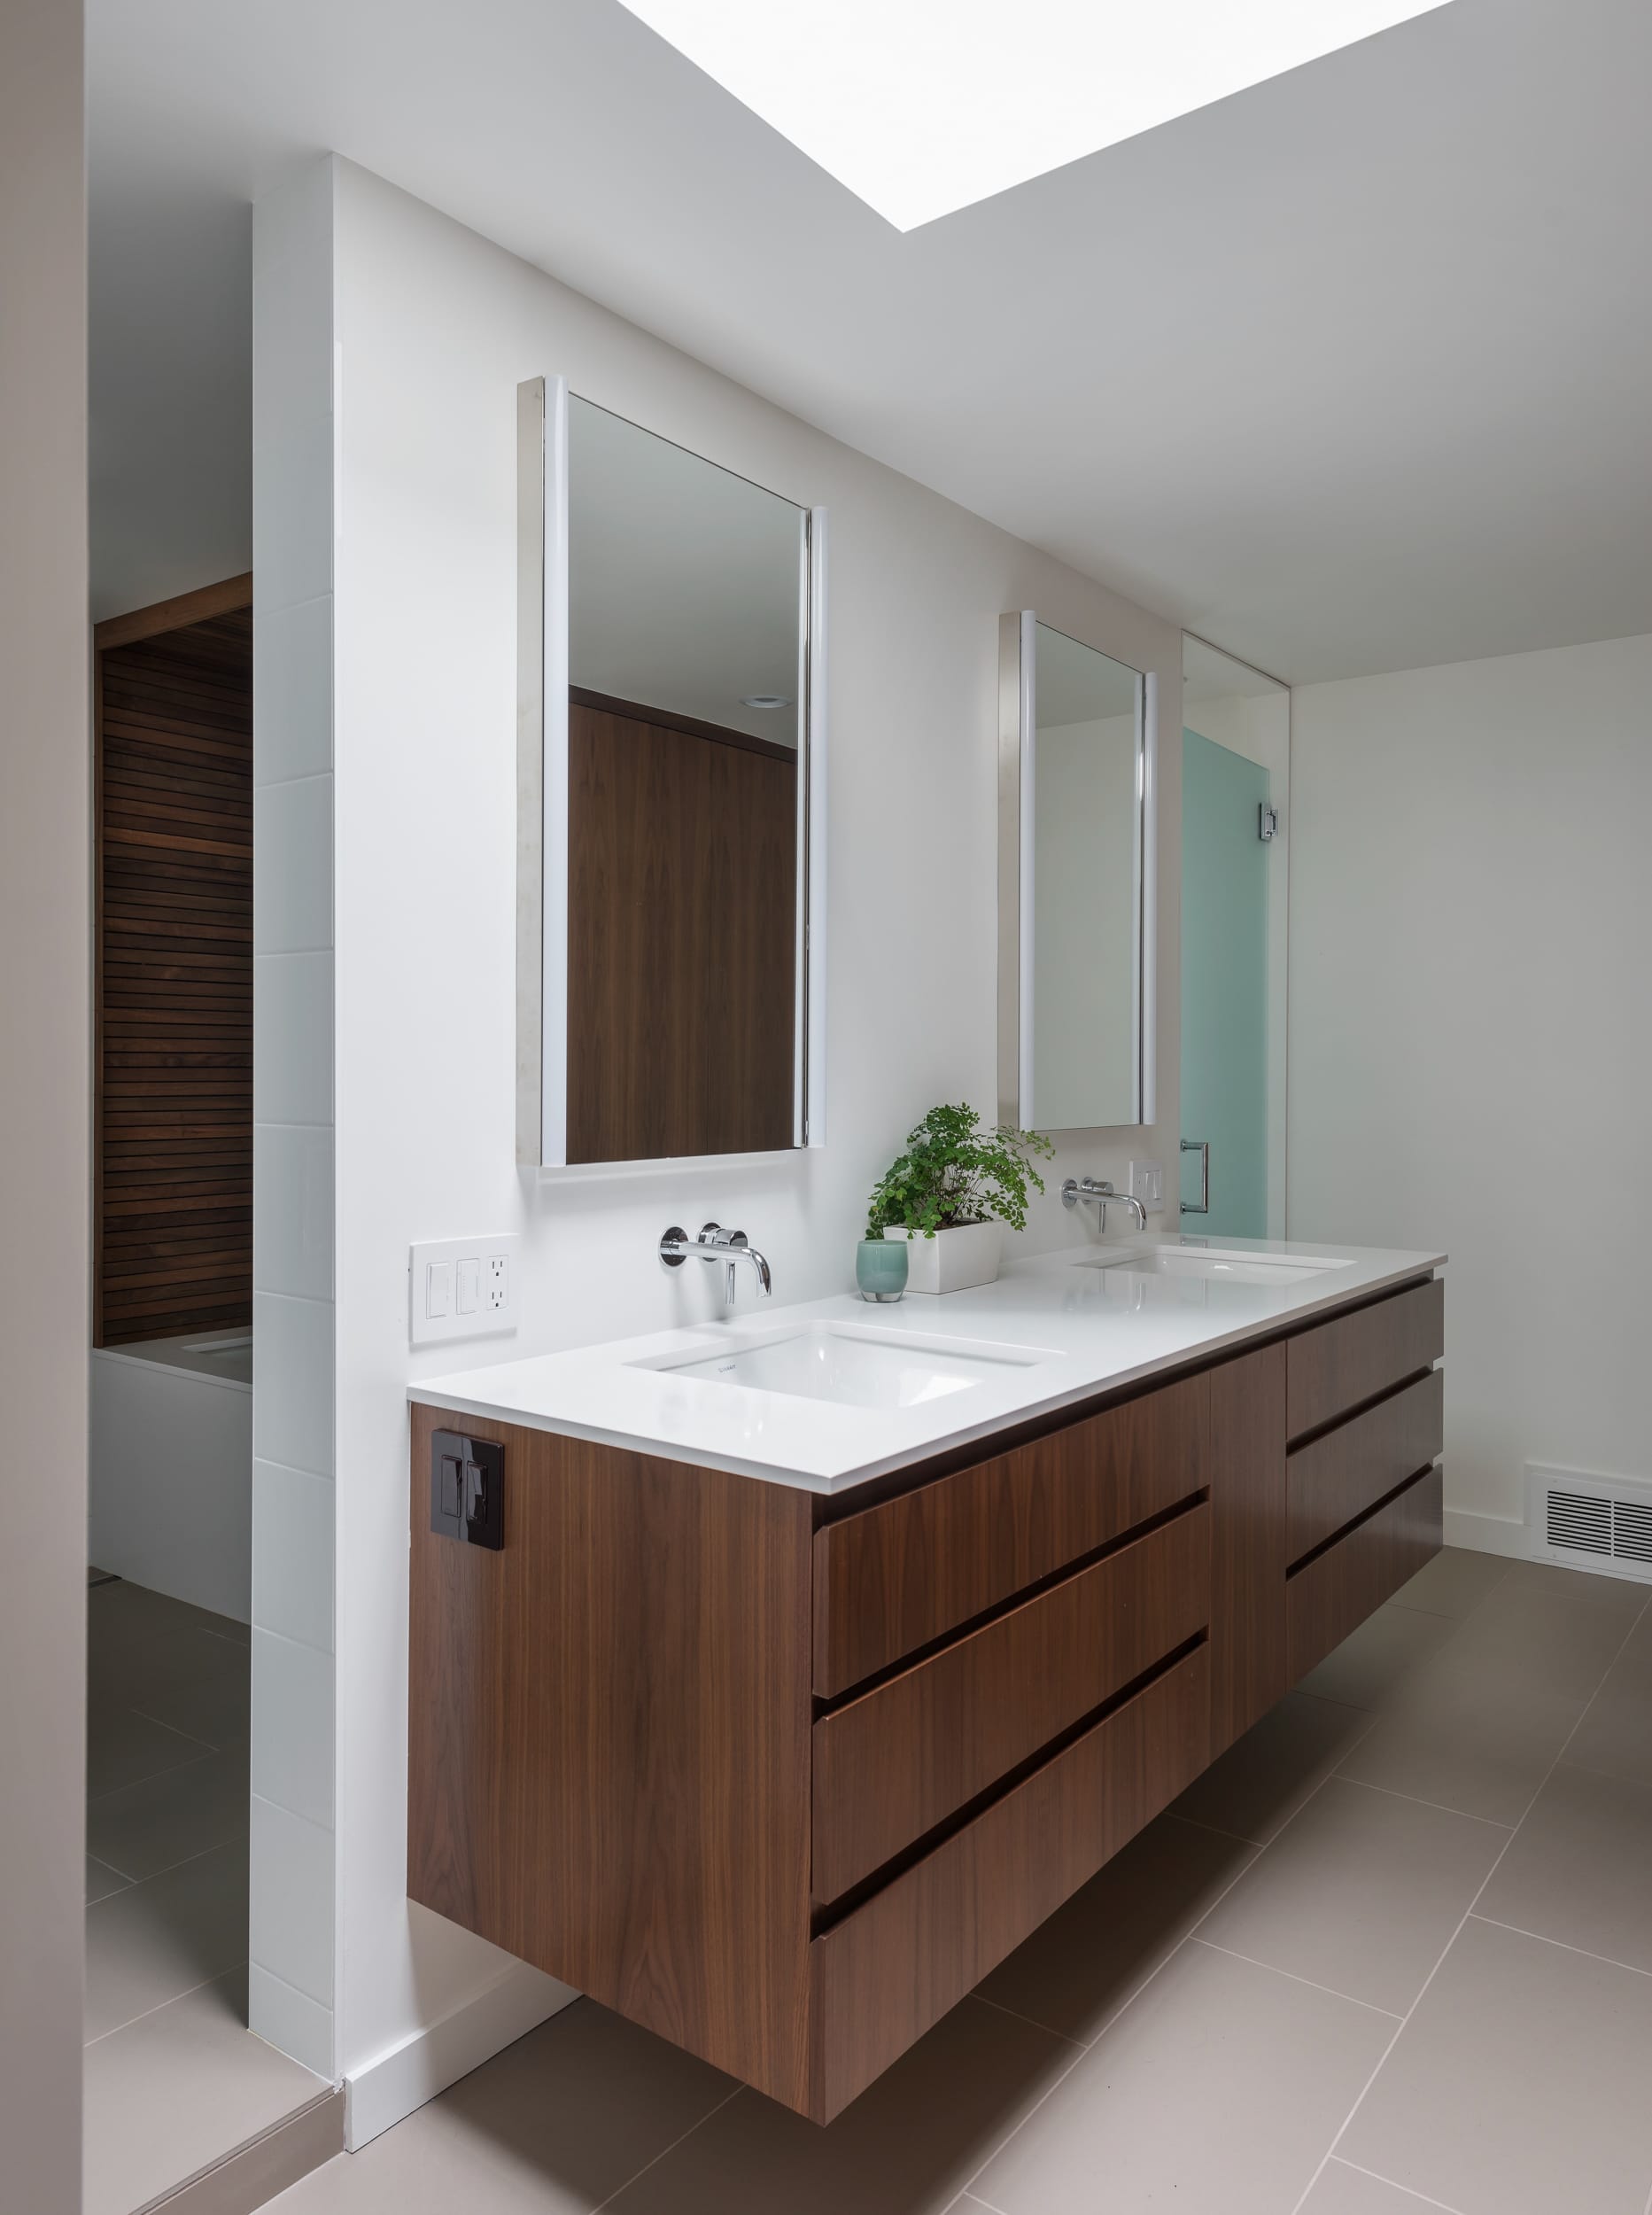 A modern bathroom with two sinks and a skylight.